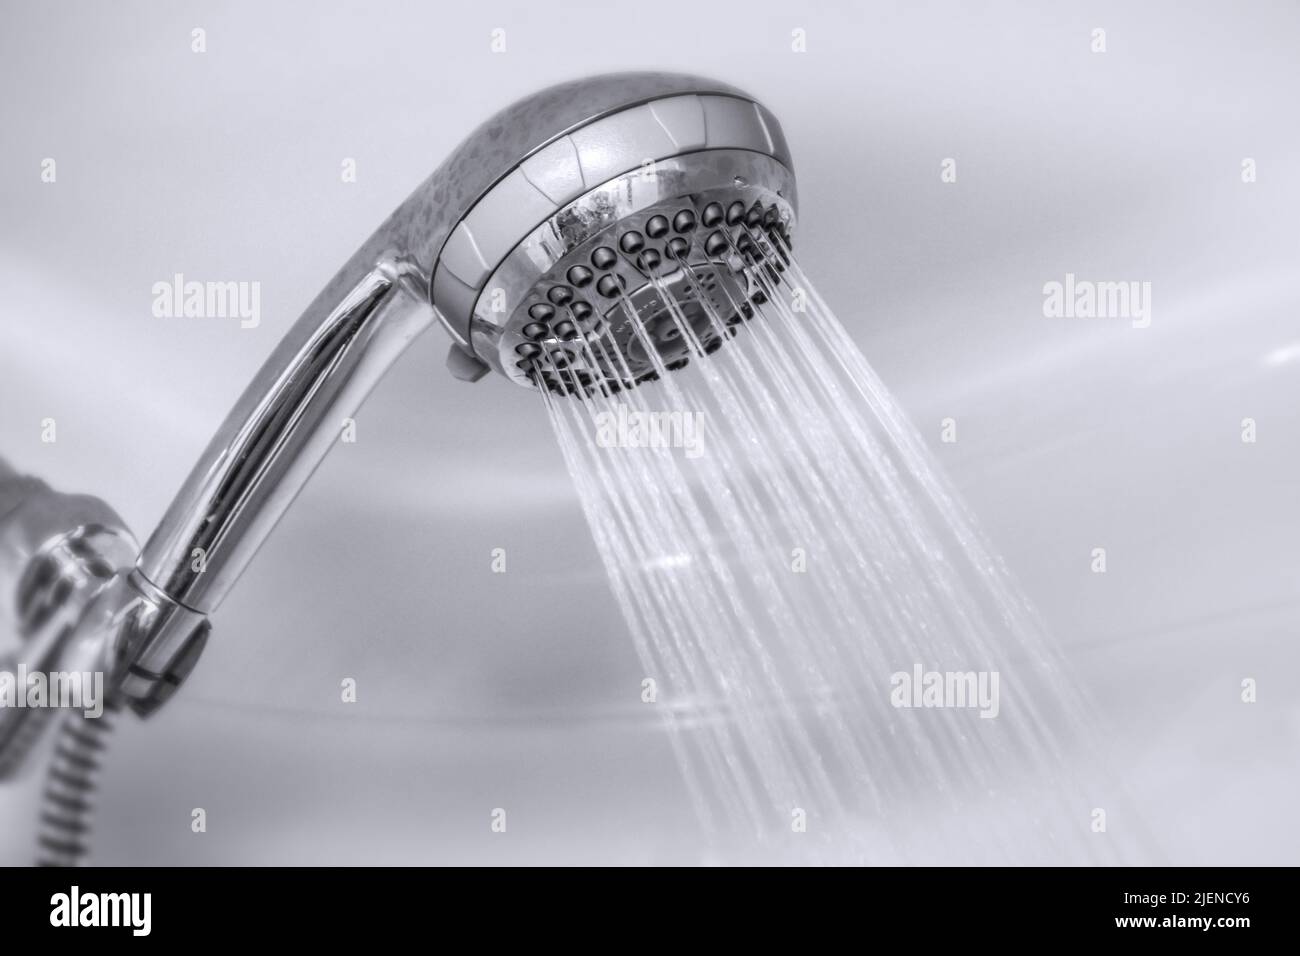 Warm water jet from the head of a handheld shower. Stock Photo